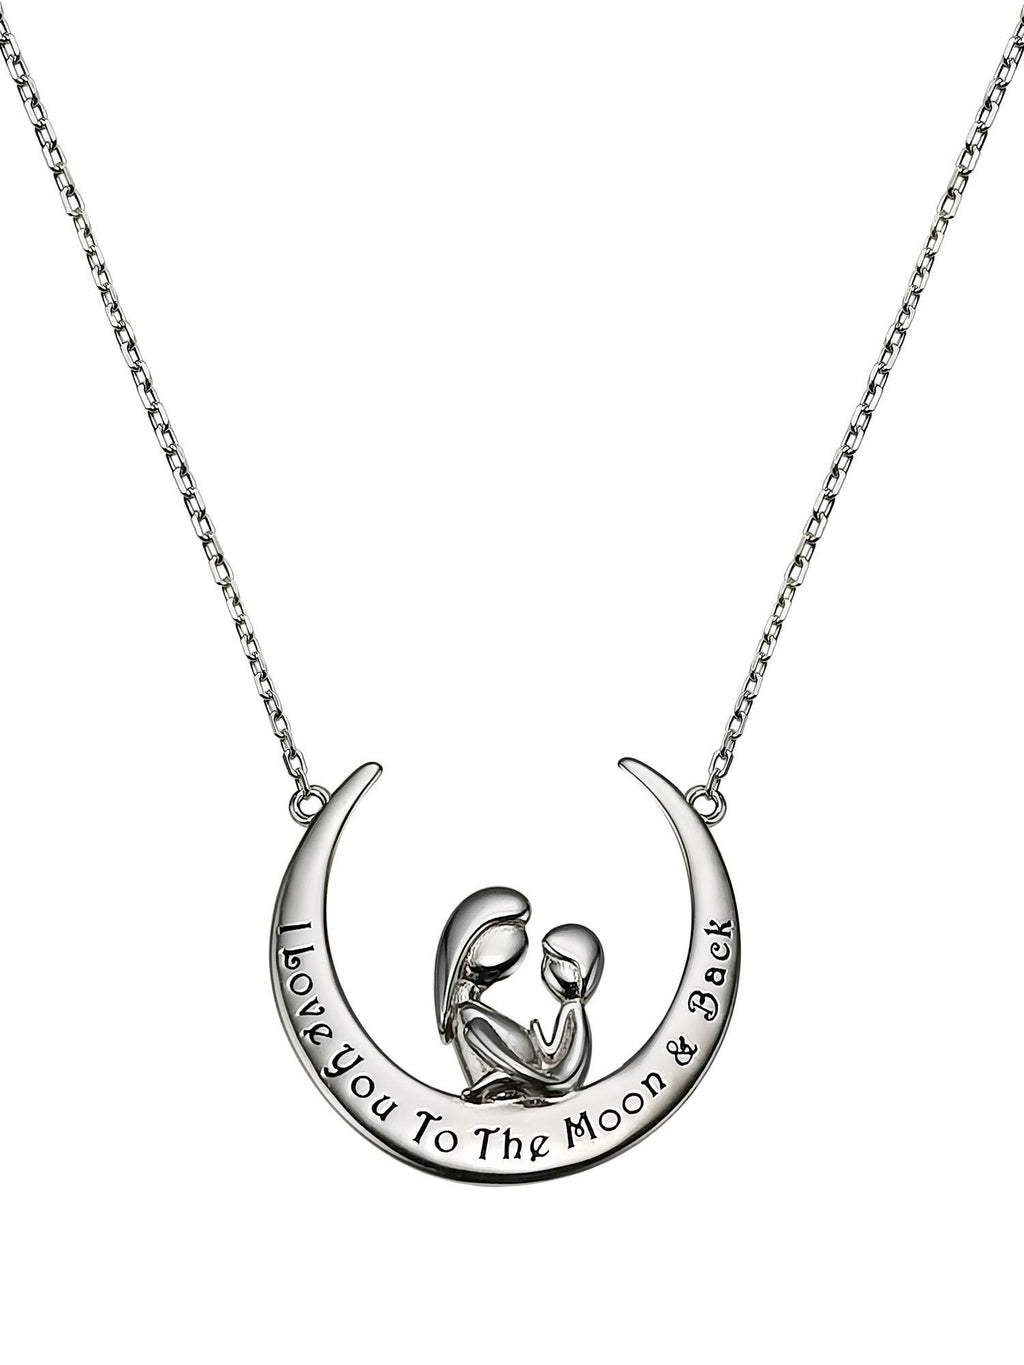 [Australia] - I Love You to The Moon & Back 925 Sterling Silver Moon Pendant Necklace for Women Girls Gifts 18" Chain Necklaces 